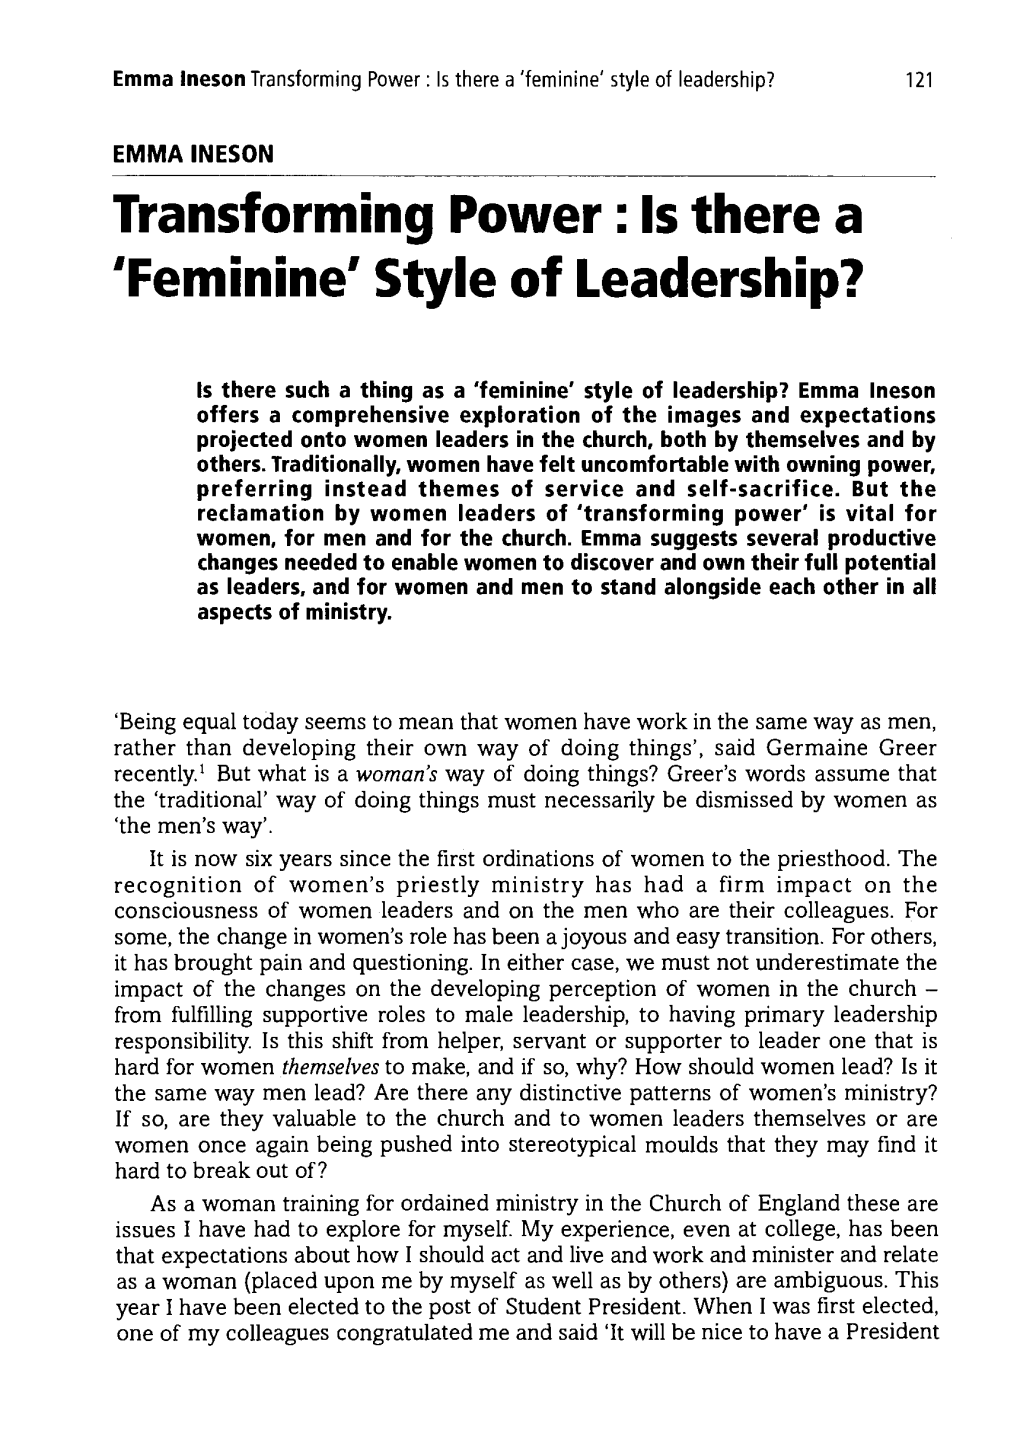 Transforming Power : Is There a 'Feminine' Style of Leadership?